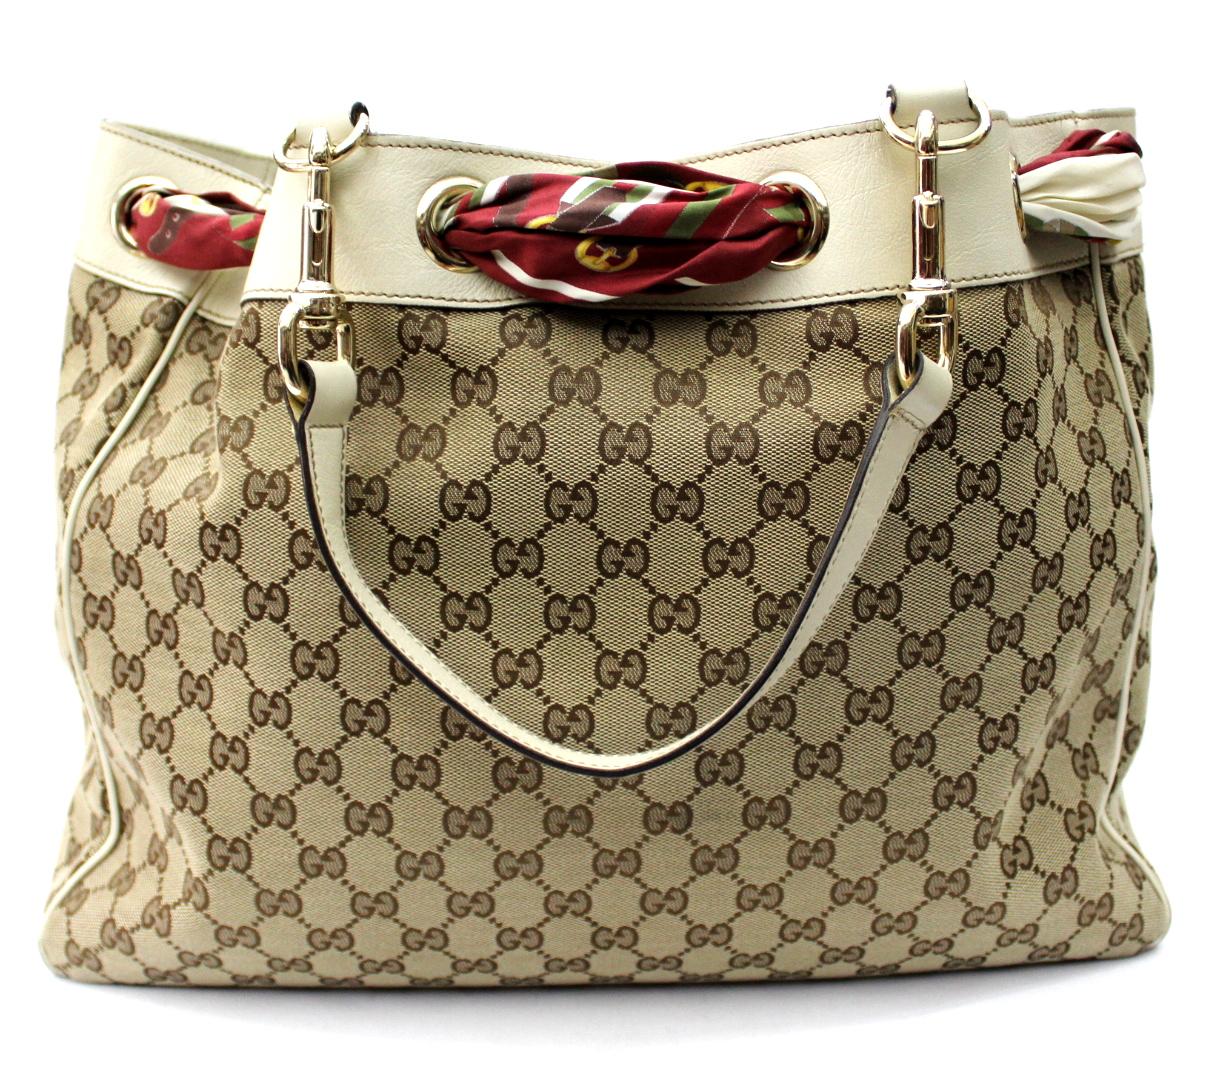 Don't miss out your opportunity to own this chic Gucci Beige GG Canvas Positano Bag. This popular style features durable GG fabric with a red Gucci silk scarf interlaced at the top. Its roomy interior is perfect for holding all your daily essentials